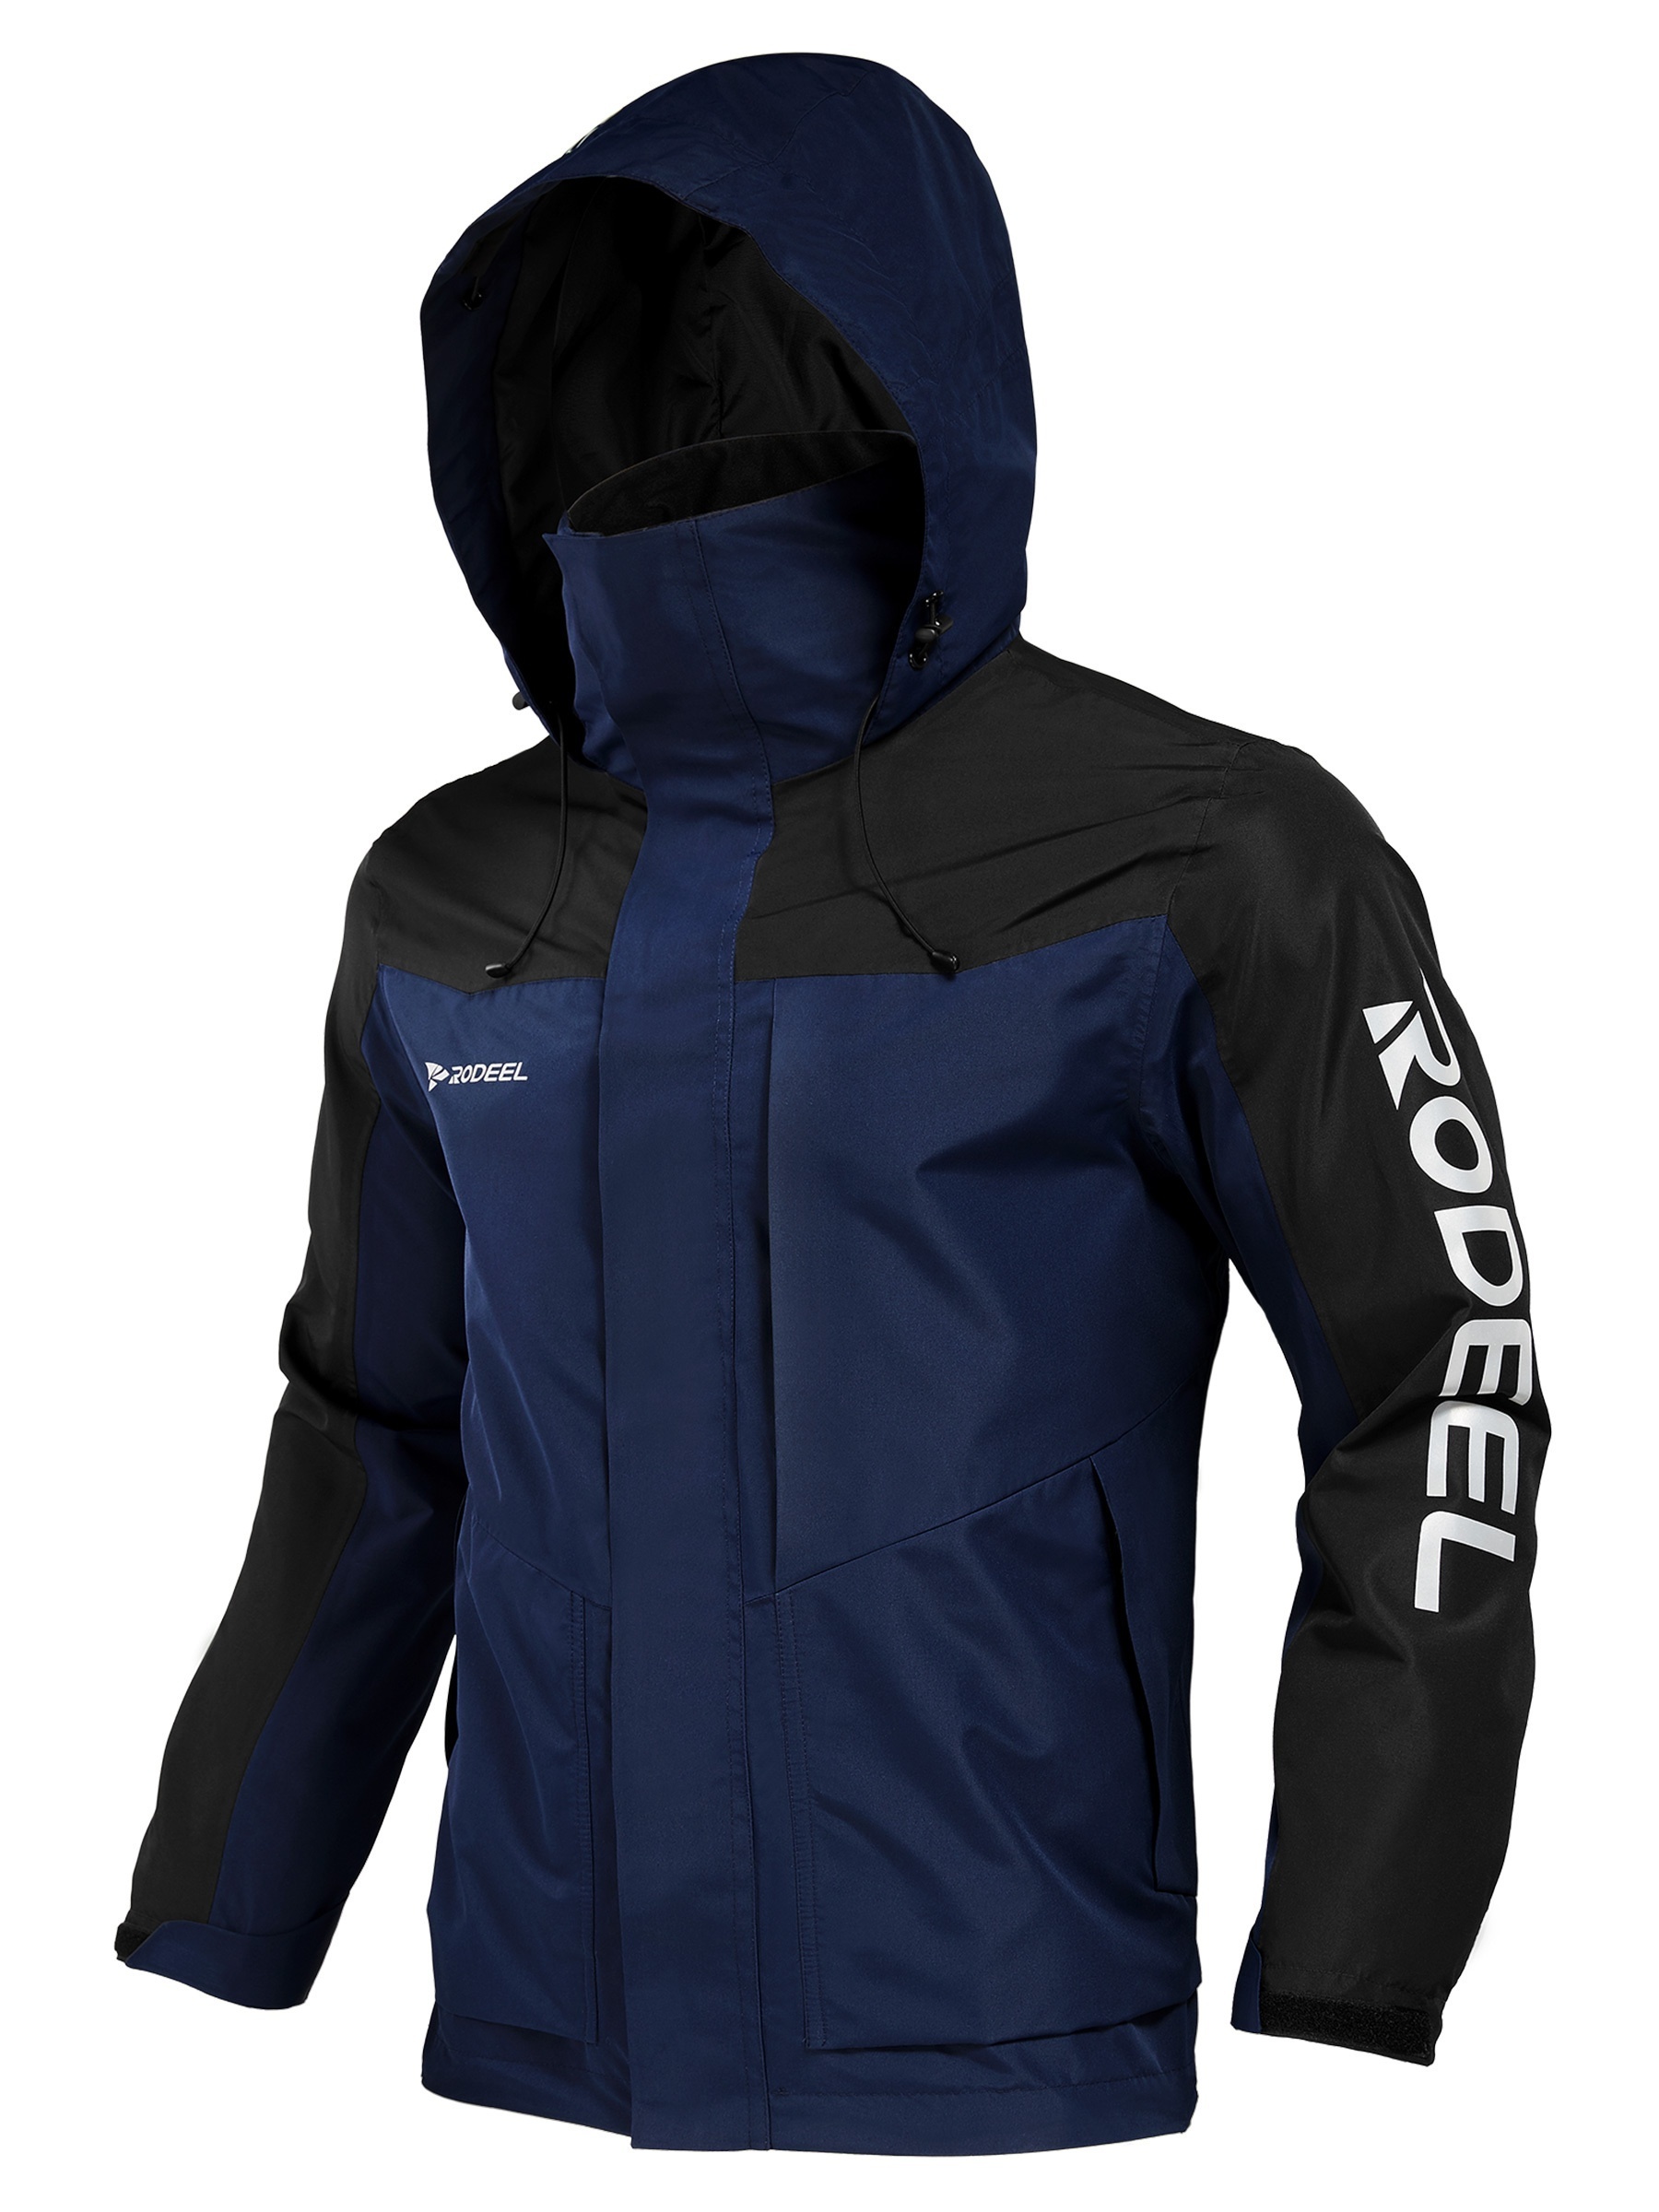 Waterproof Hooded Jacket For Men - Reflective Design, Breathable & Comfortable Coat For Outdoor Events, Fishing & Daily Wear